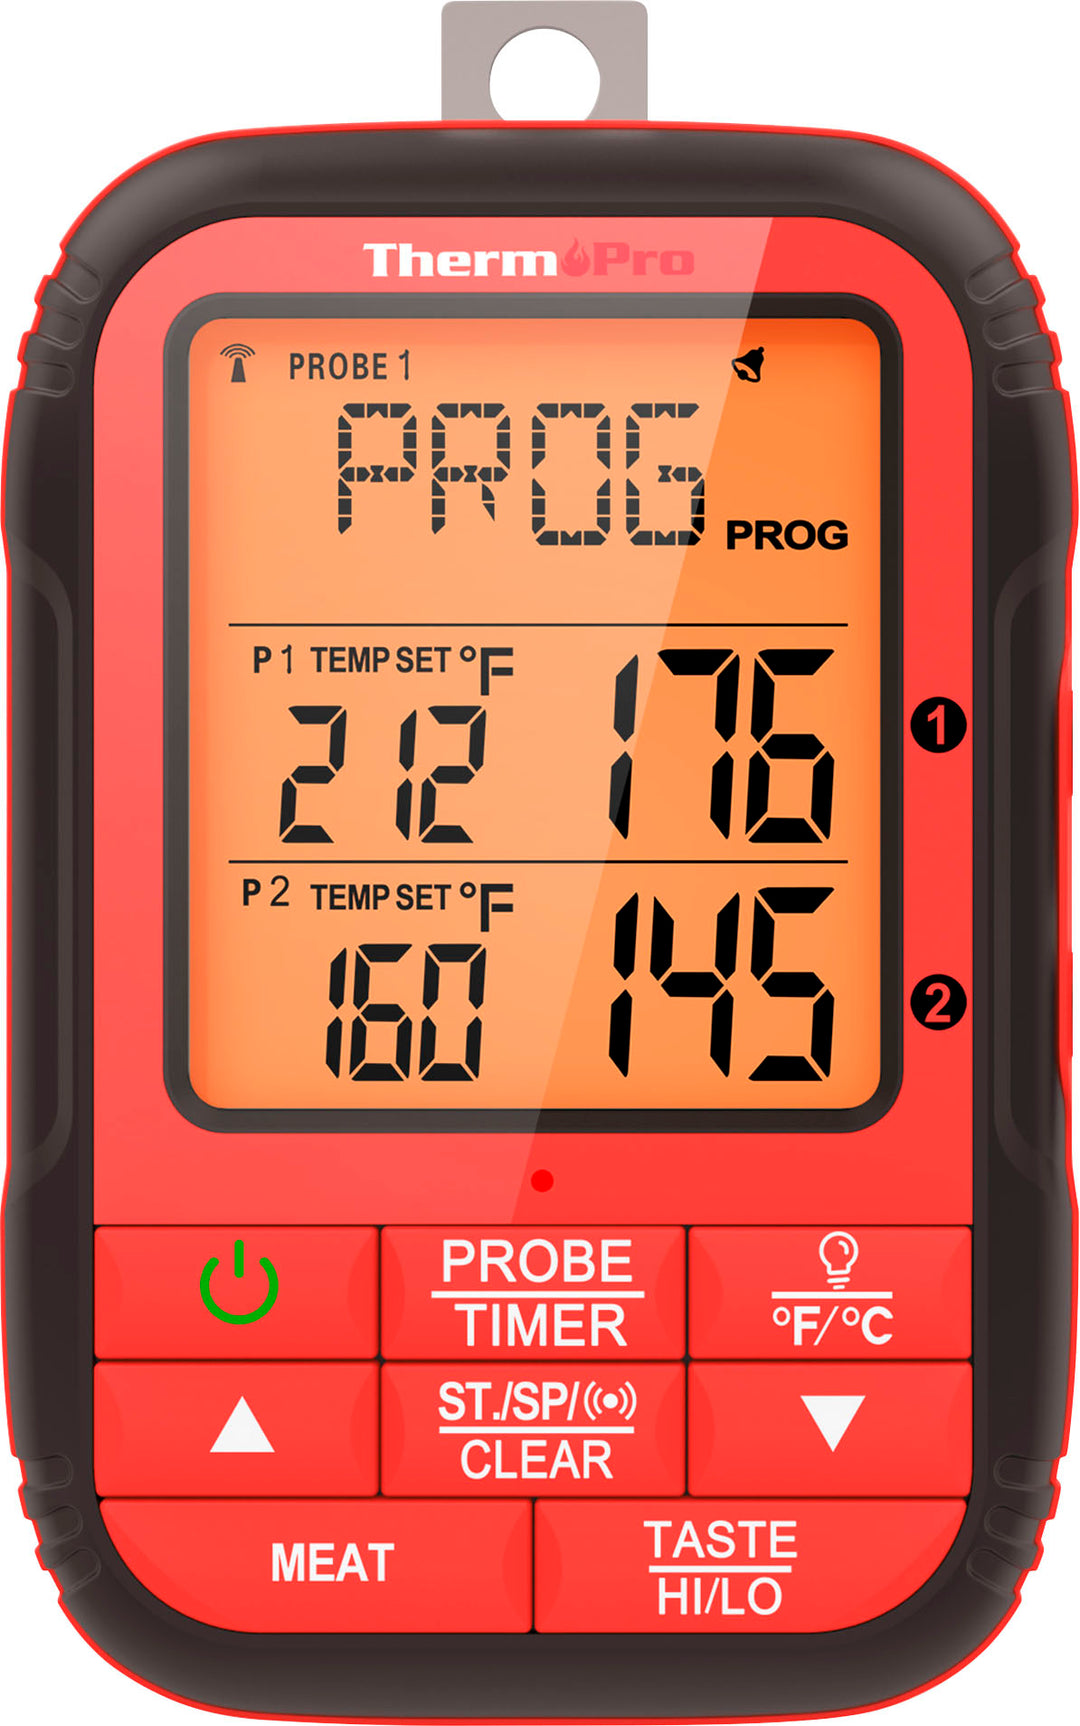 ThermoPro - Dual Probe Wireless Meat Thermometer - Red_2